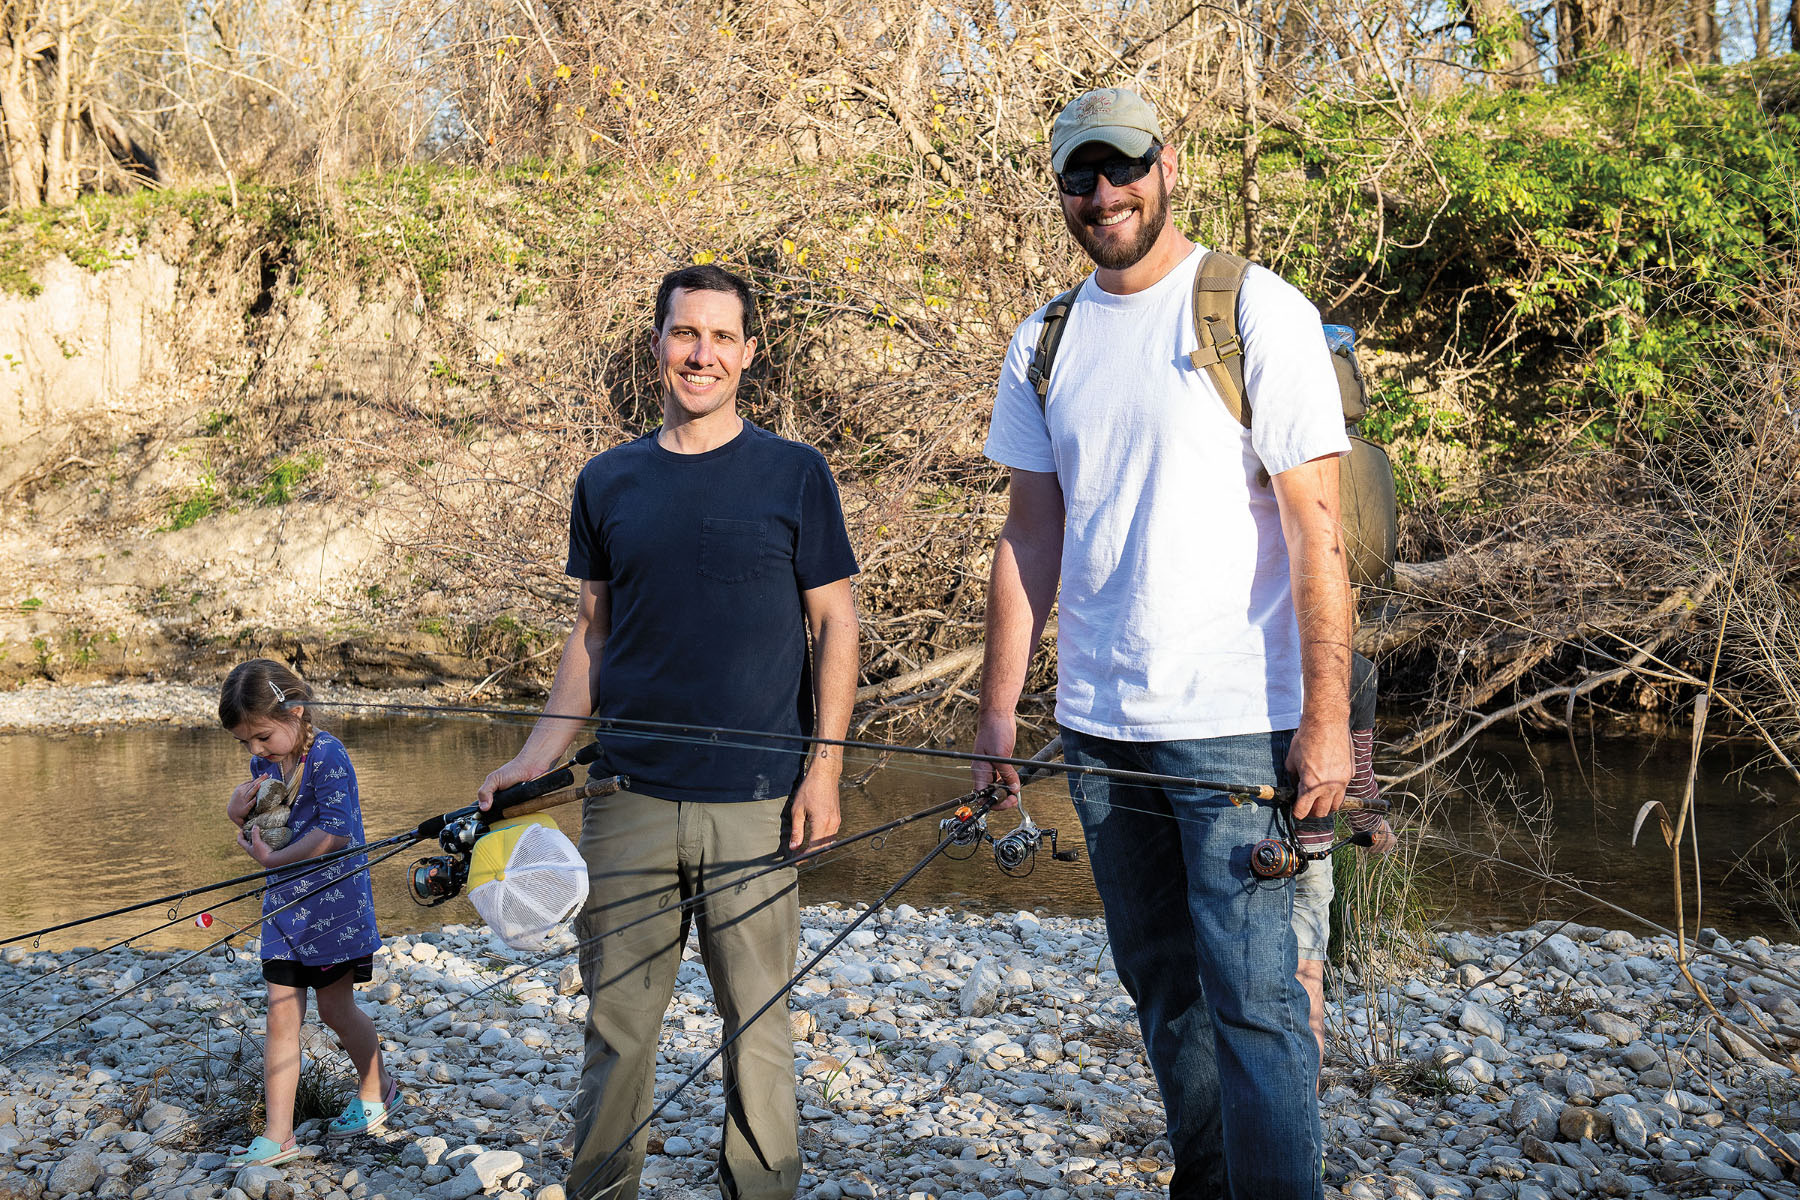 A young person and two adult men stand in t-shirts holding fishing rods along a rocky embankment